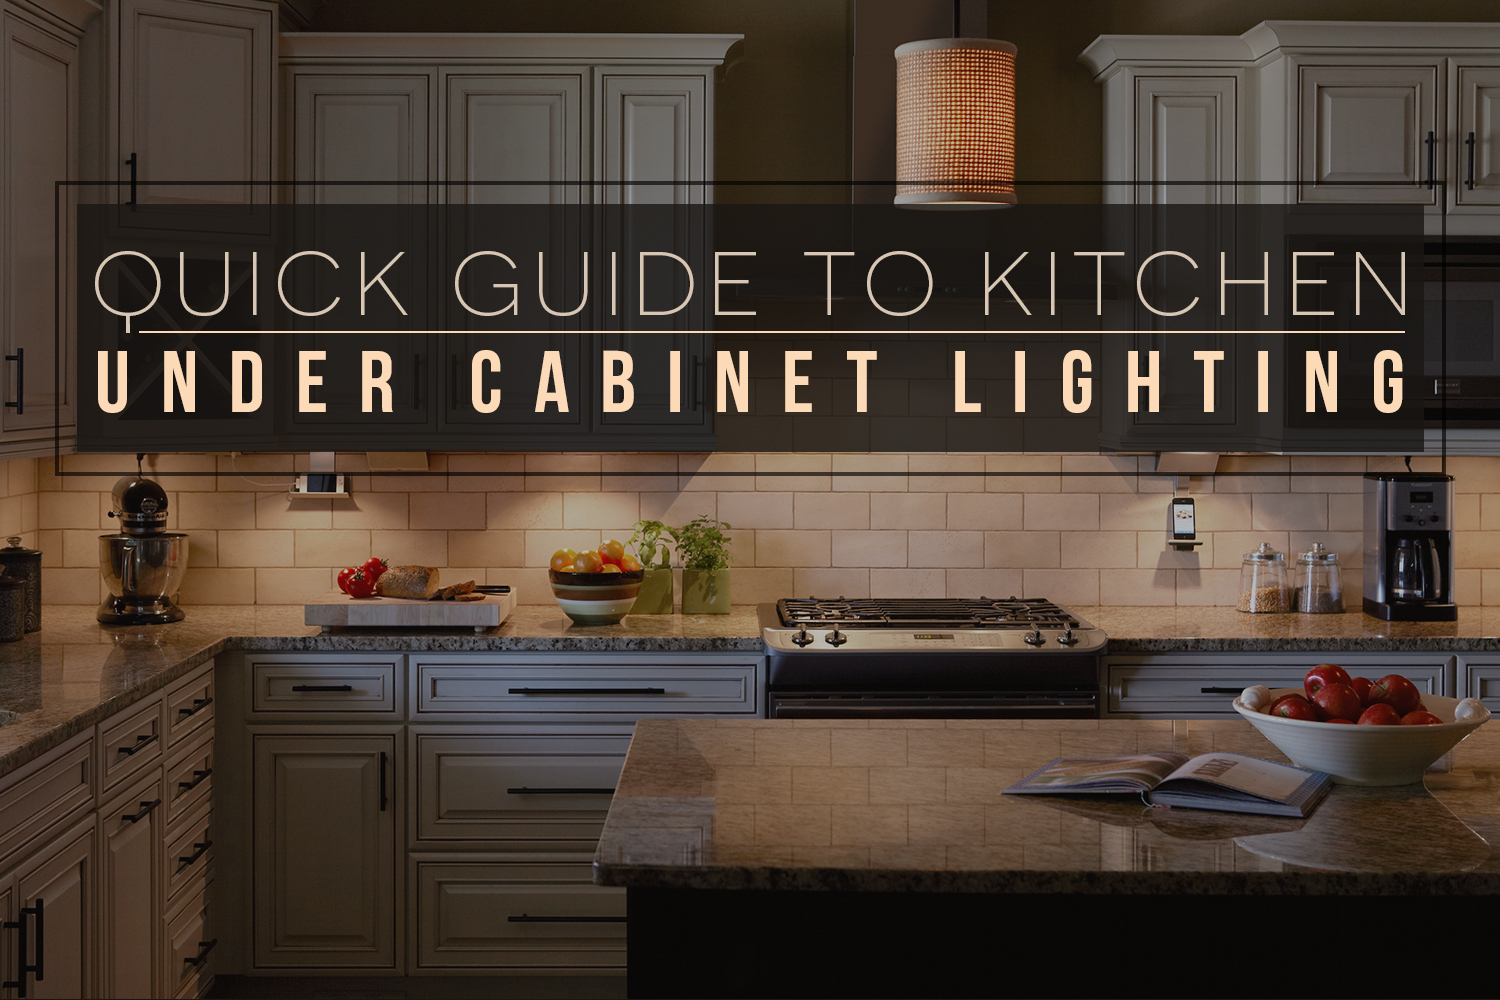 Quick Guide to Kitchen Under Cabinet Lighting